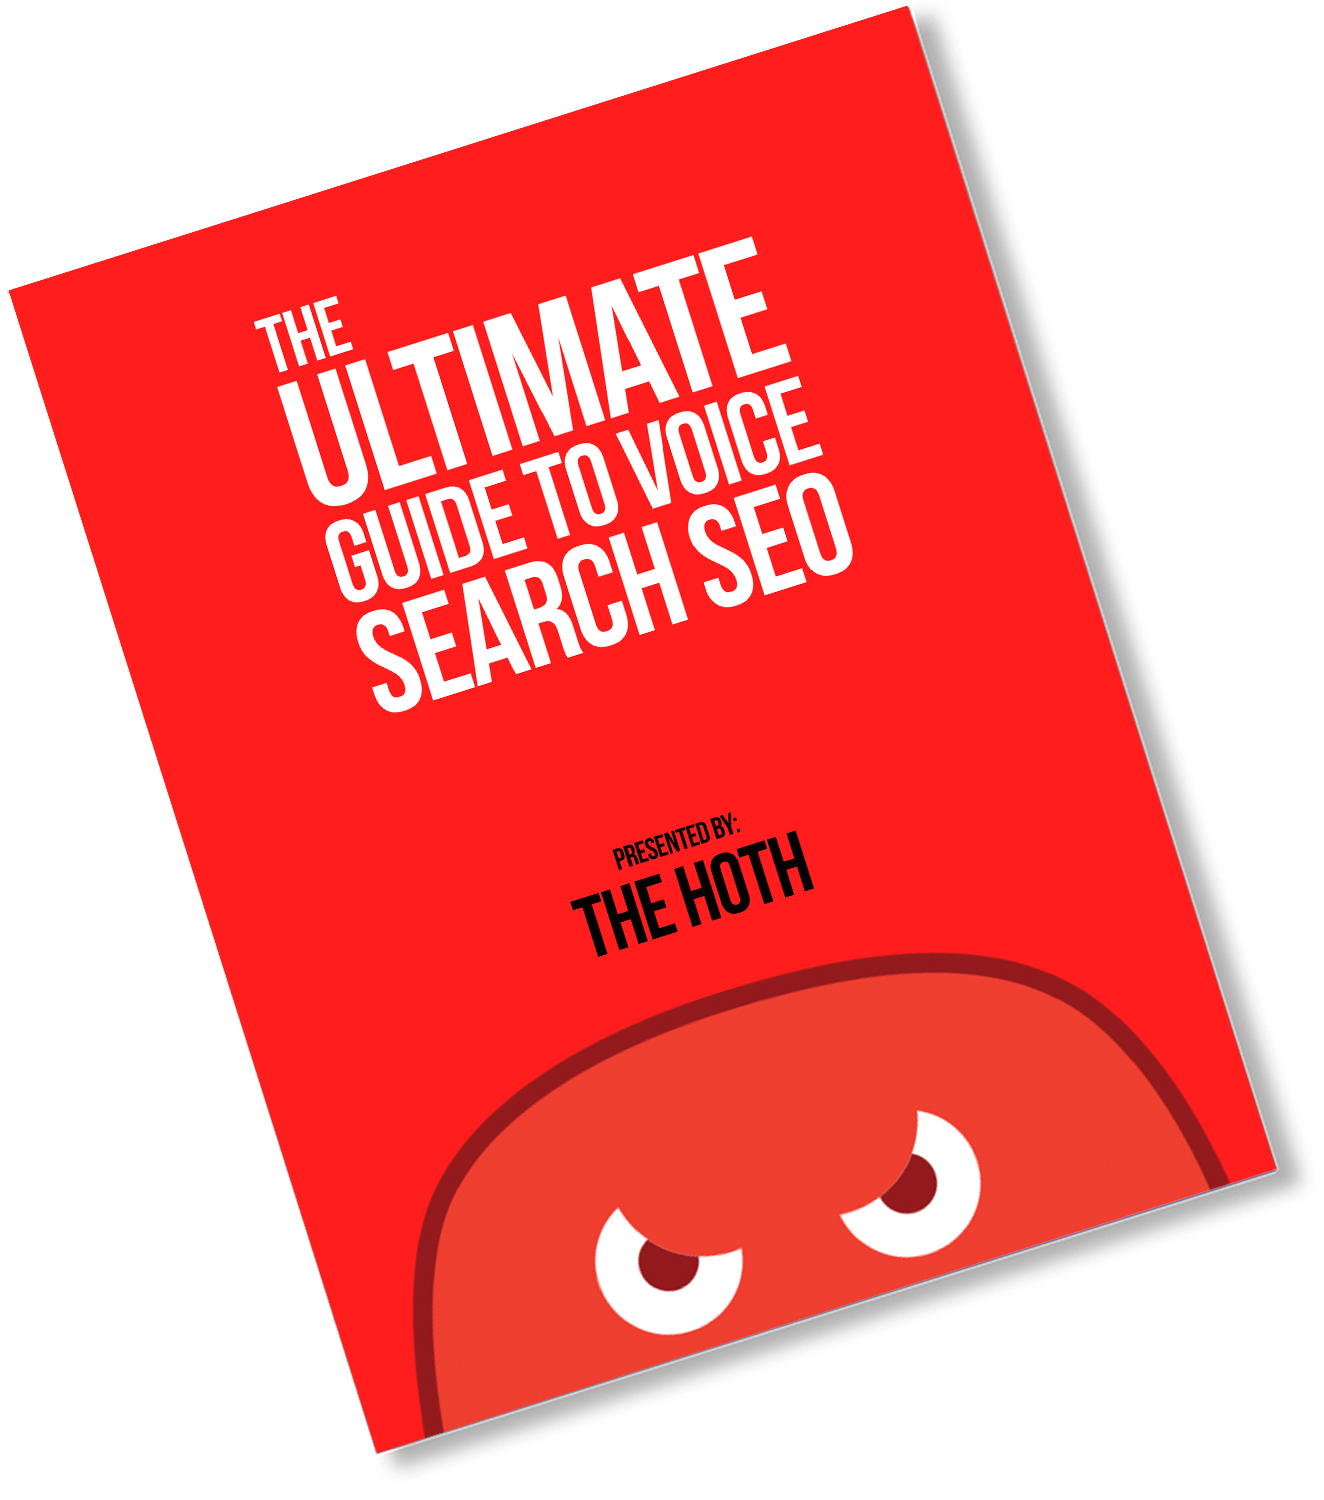 Search Engine Optimisation Packages